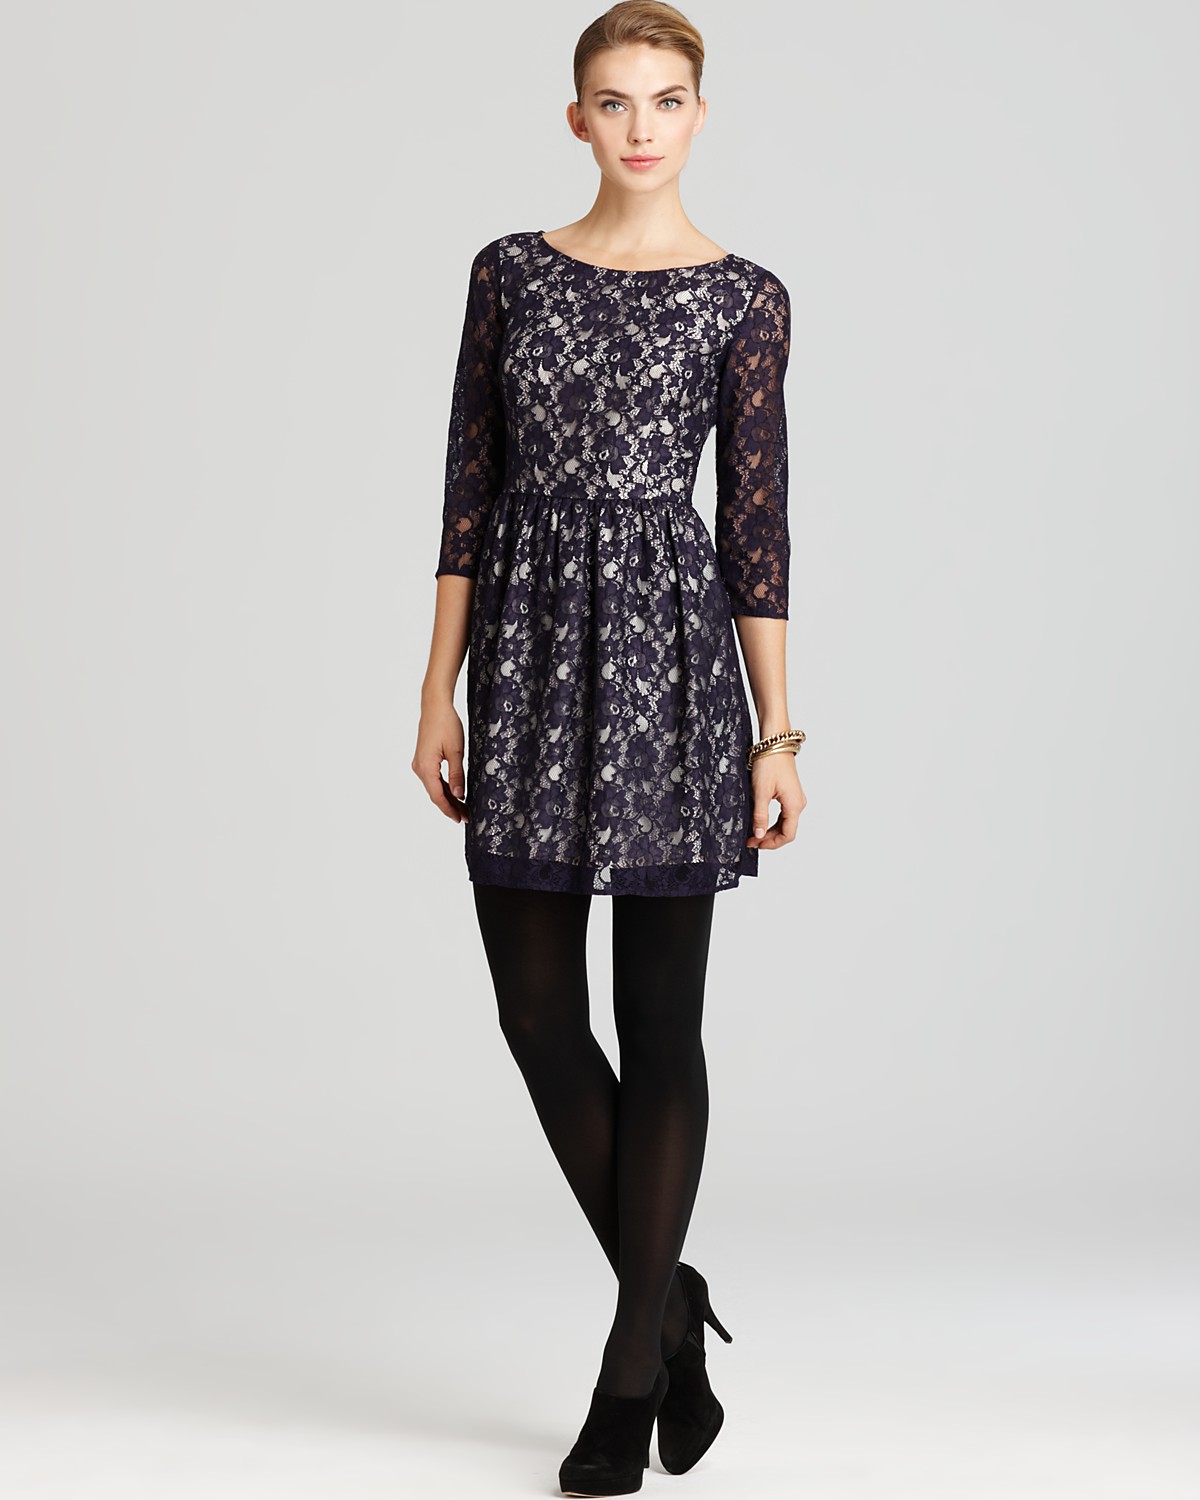 French Connection Dress - Lizzie Lace | Bloomingdale's